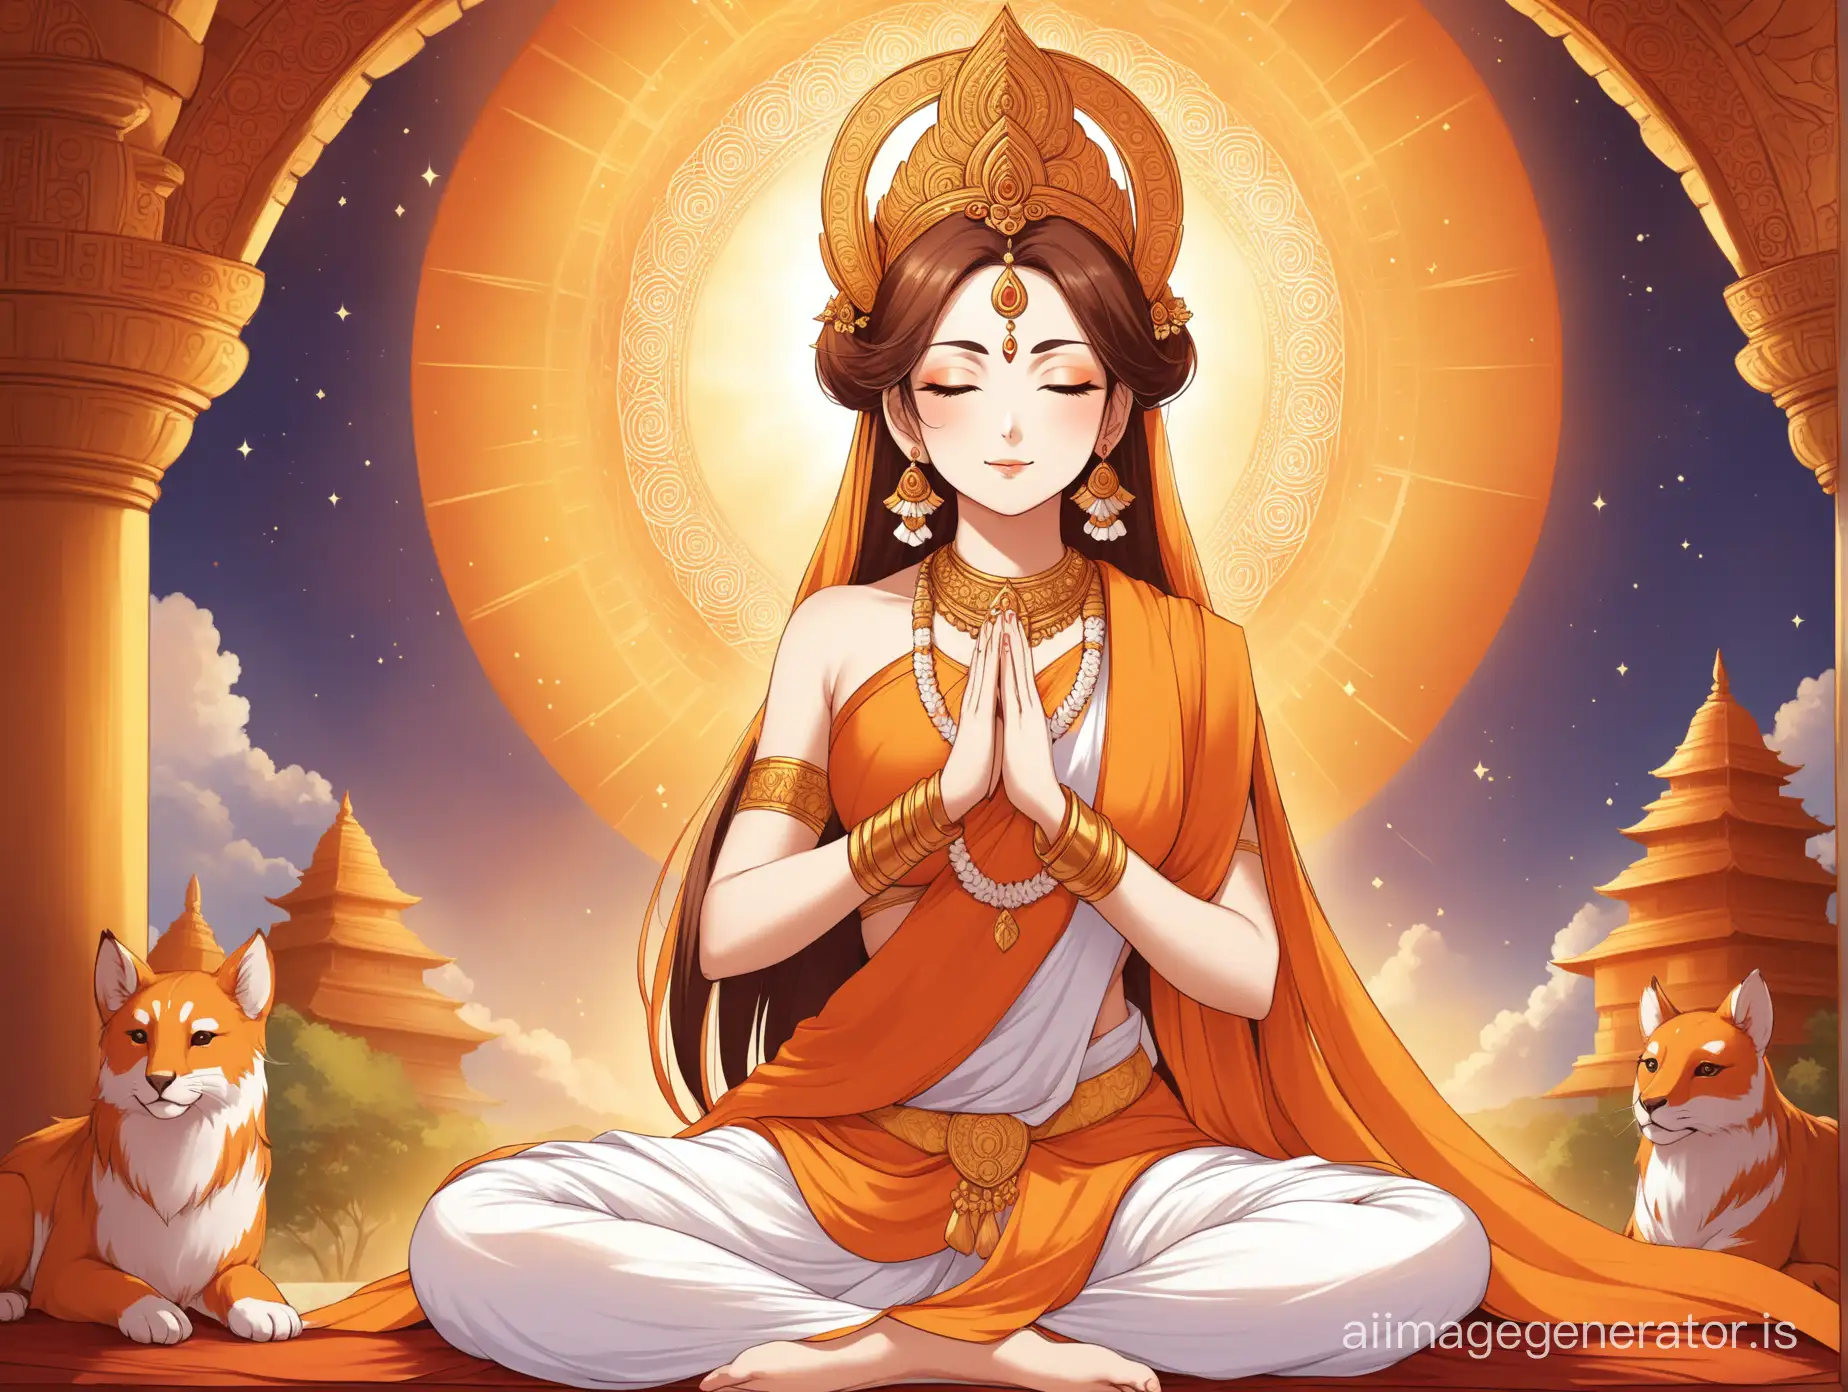 "Capture the serene beauty of Goddess Sita as she sits in meditation, radiating inner peace and spiritual wisdom."